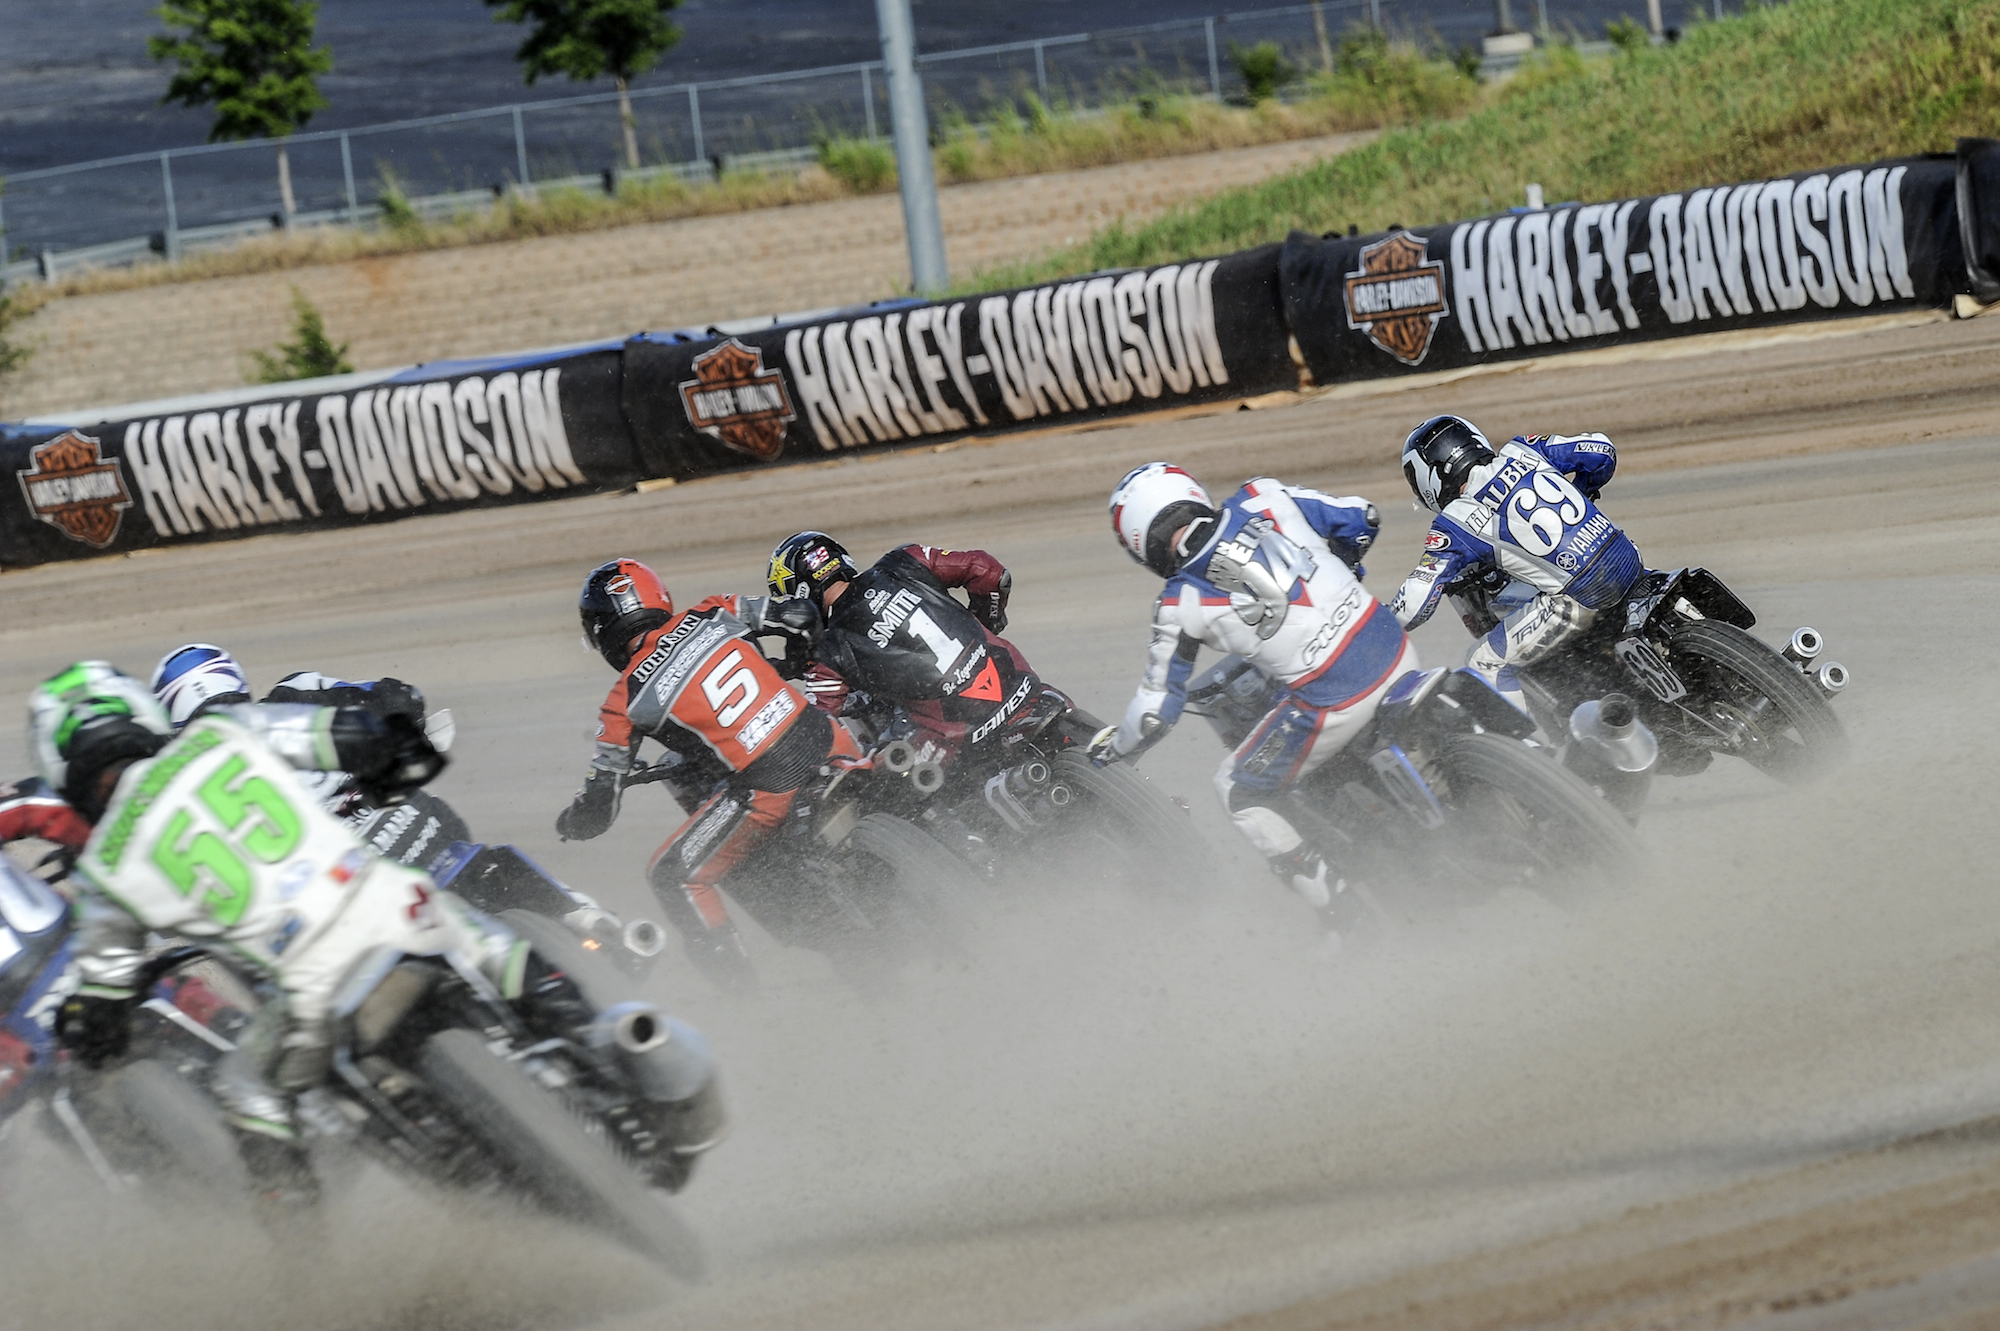 We Went Full-Throttle at a Flat Track Motorcycle Race, The Rawest Sport